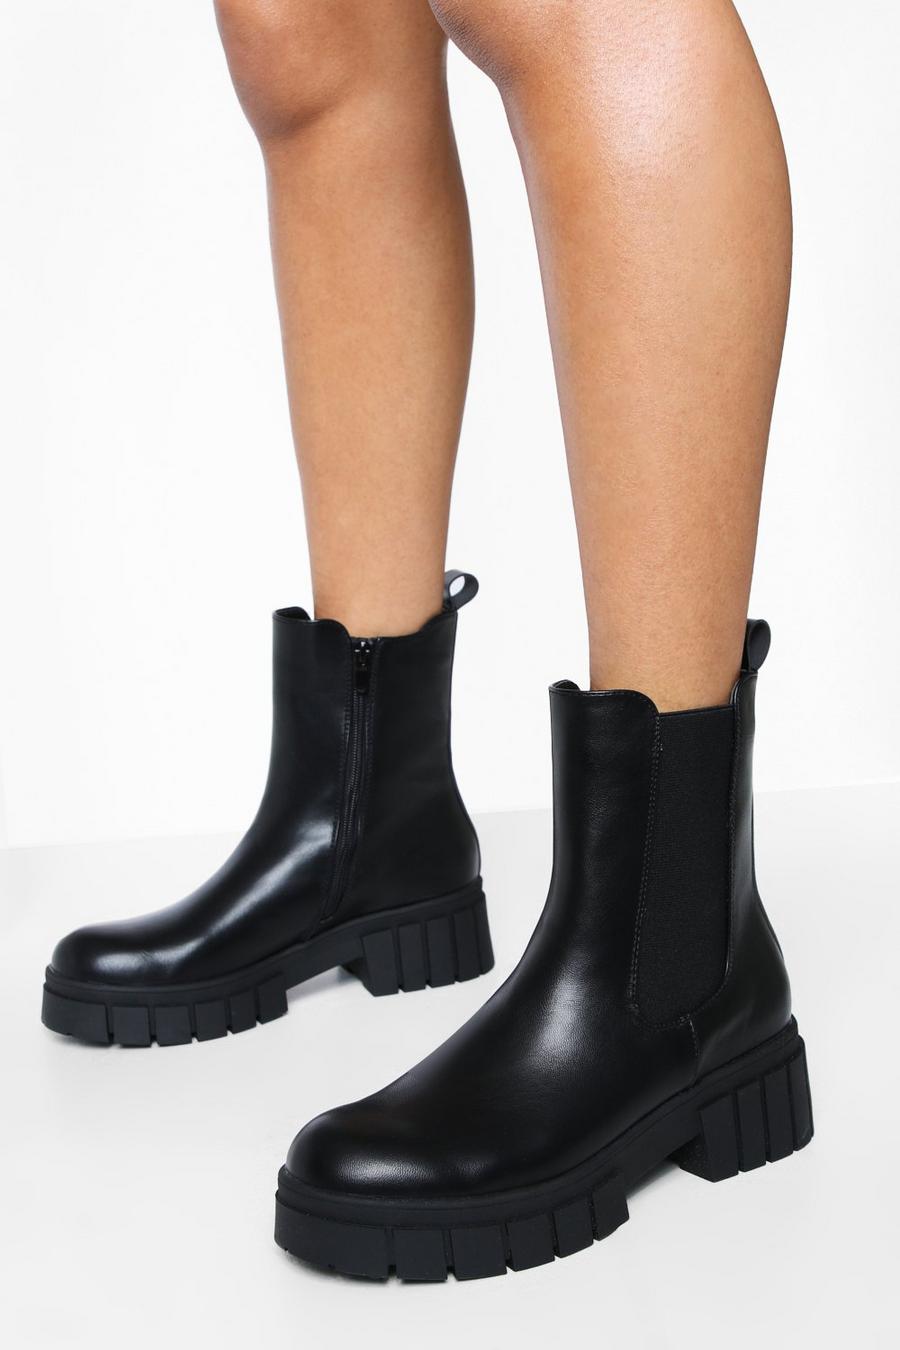 Black Heeled Cleated Sole Chelsea Boots image number 1